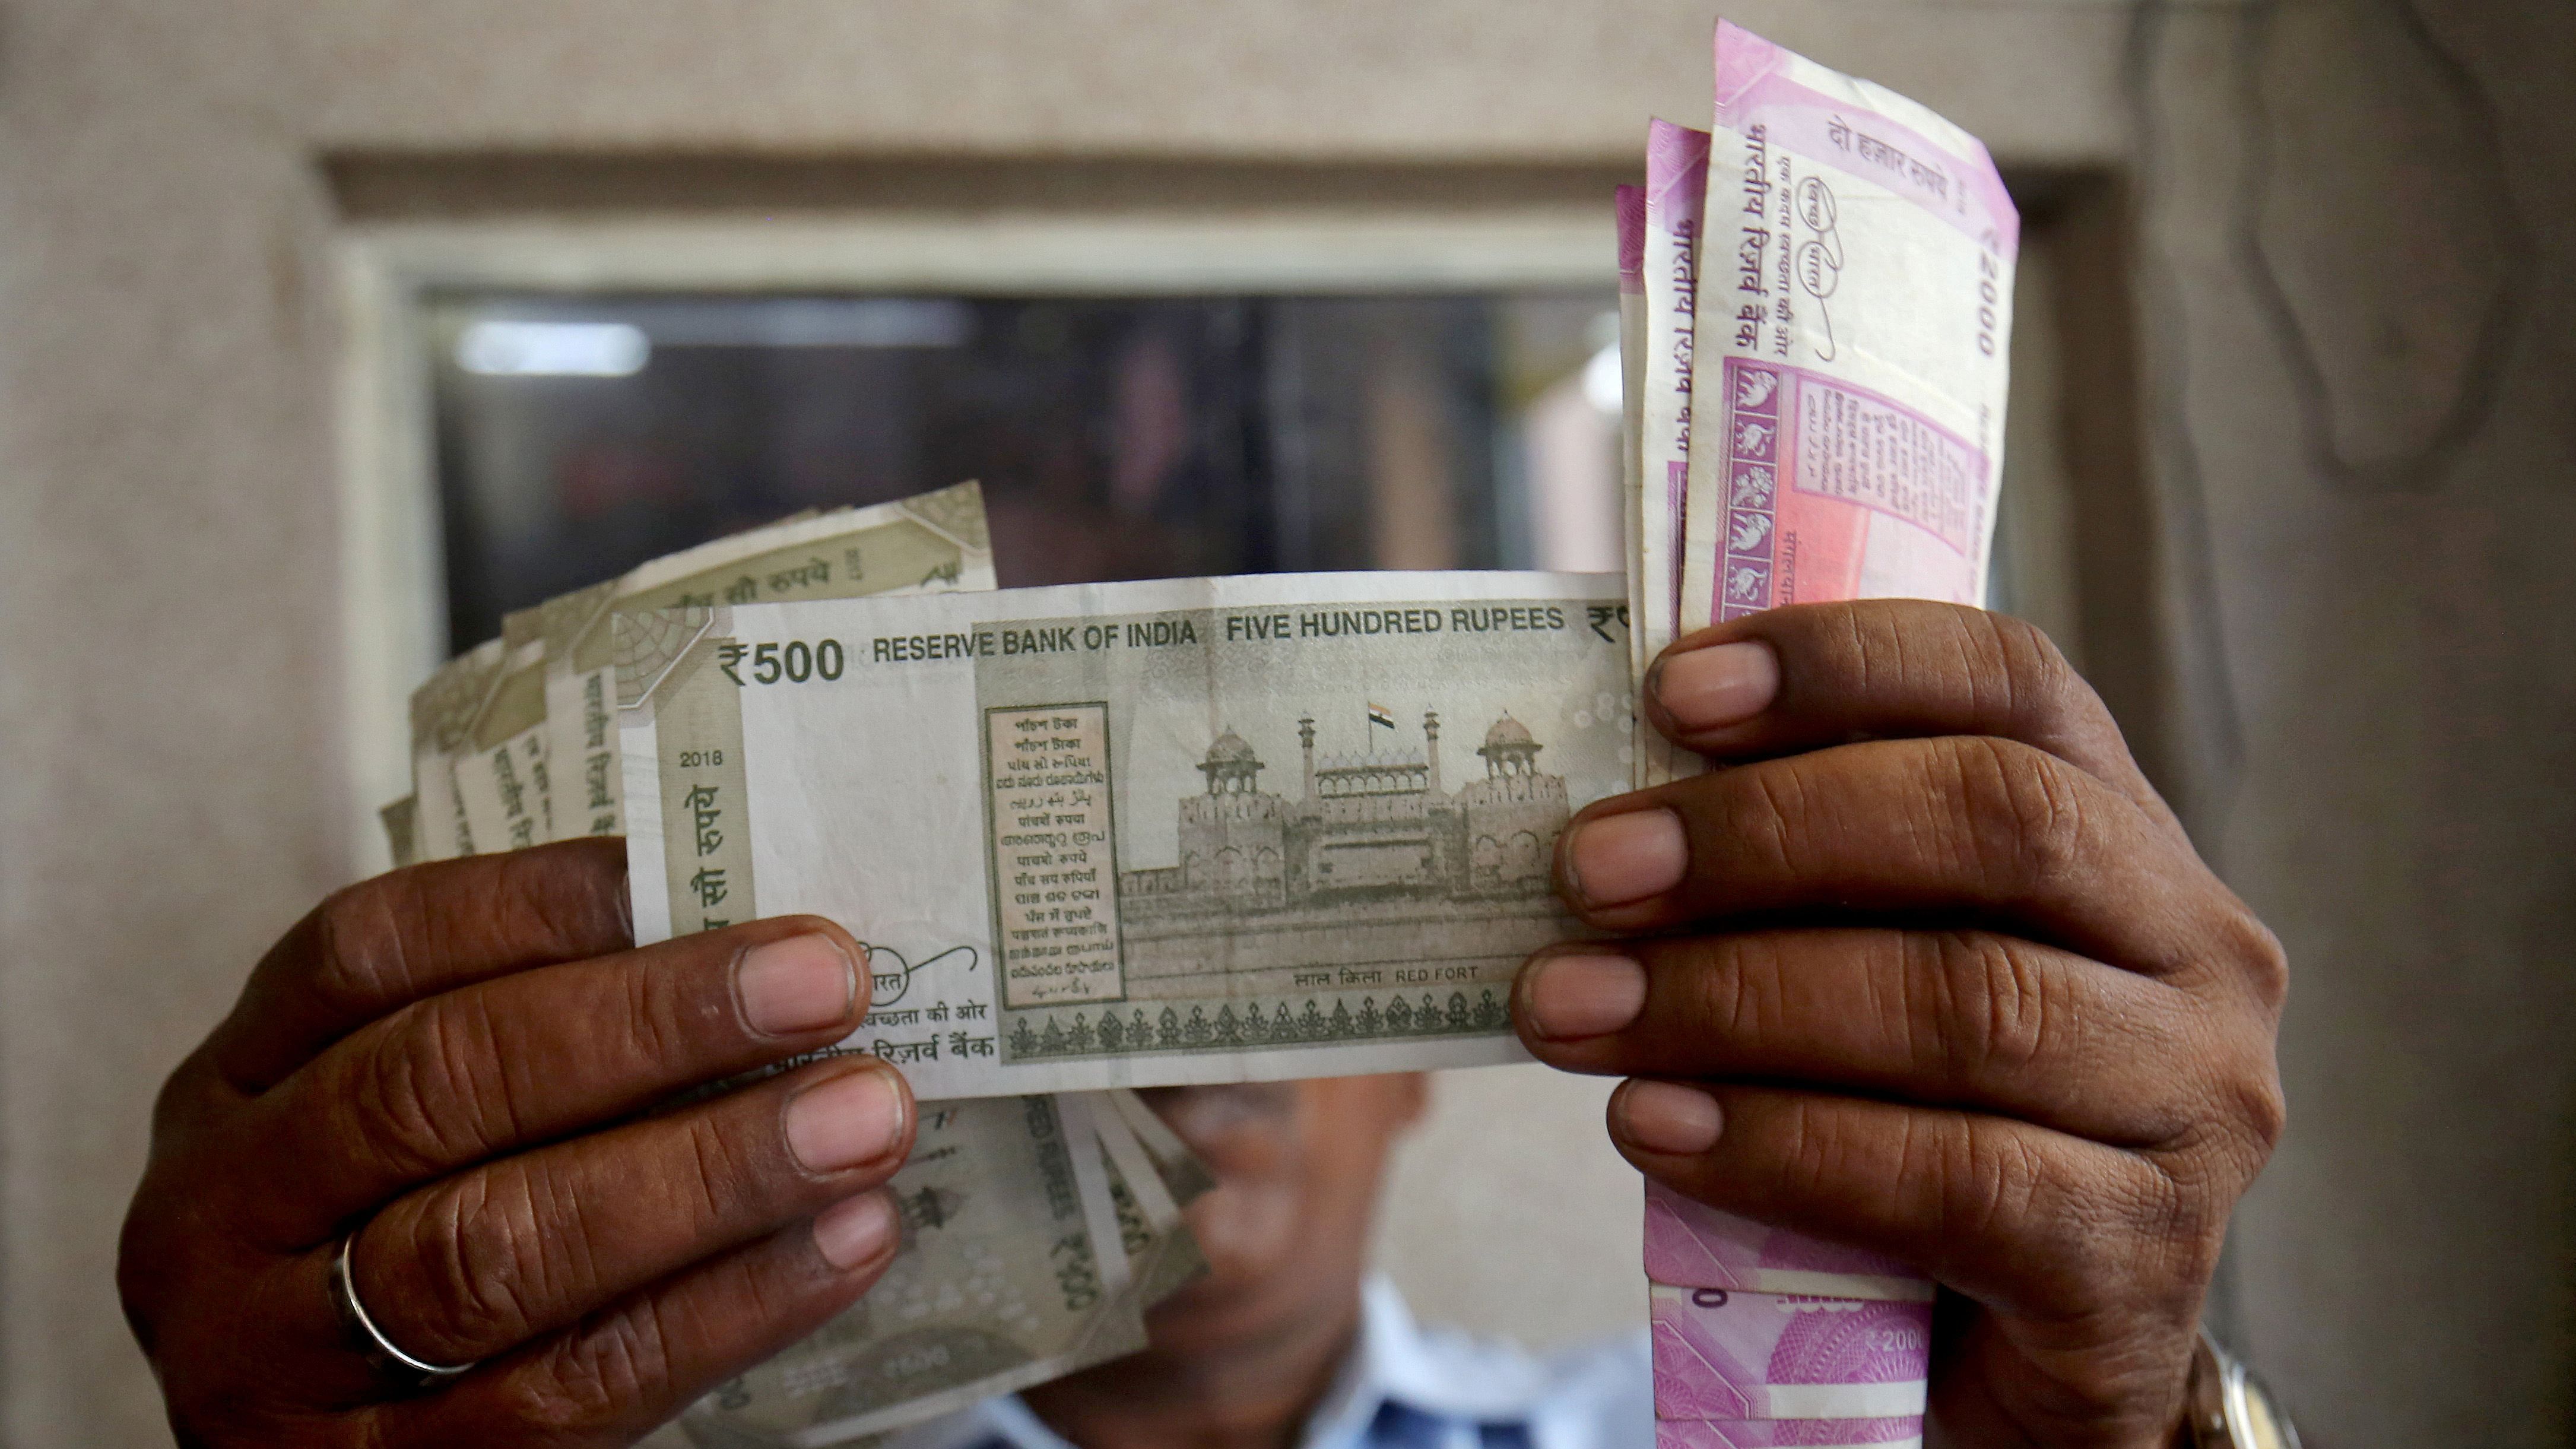 Cash use plummeted in India after Prime Minister Narendra Modi cancelled 86 per cent of the existing legal tender overnight as part of a botched economic experiment. Credit: Reuters photo